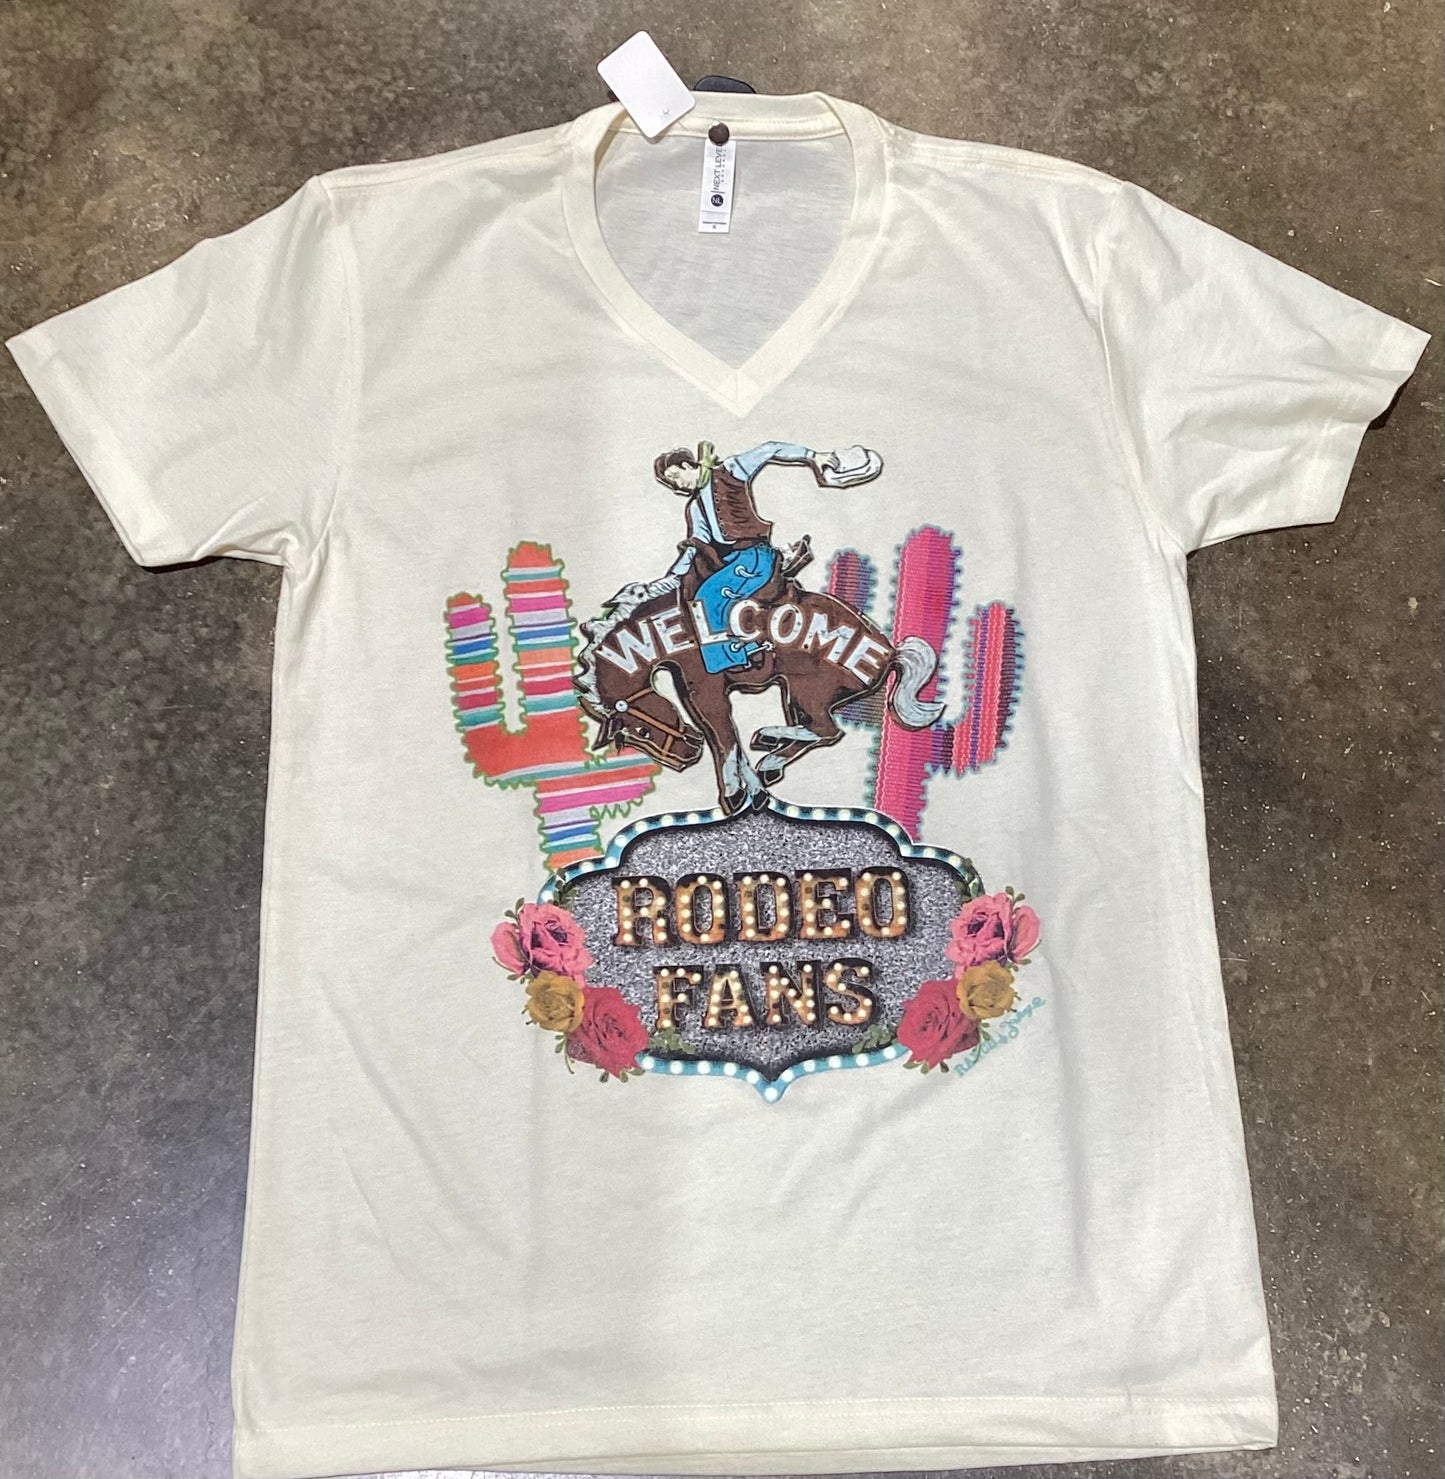 WELCOME RODEO FANS TEE SHIRT